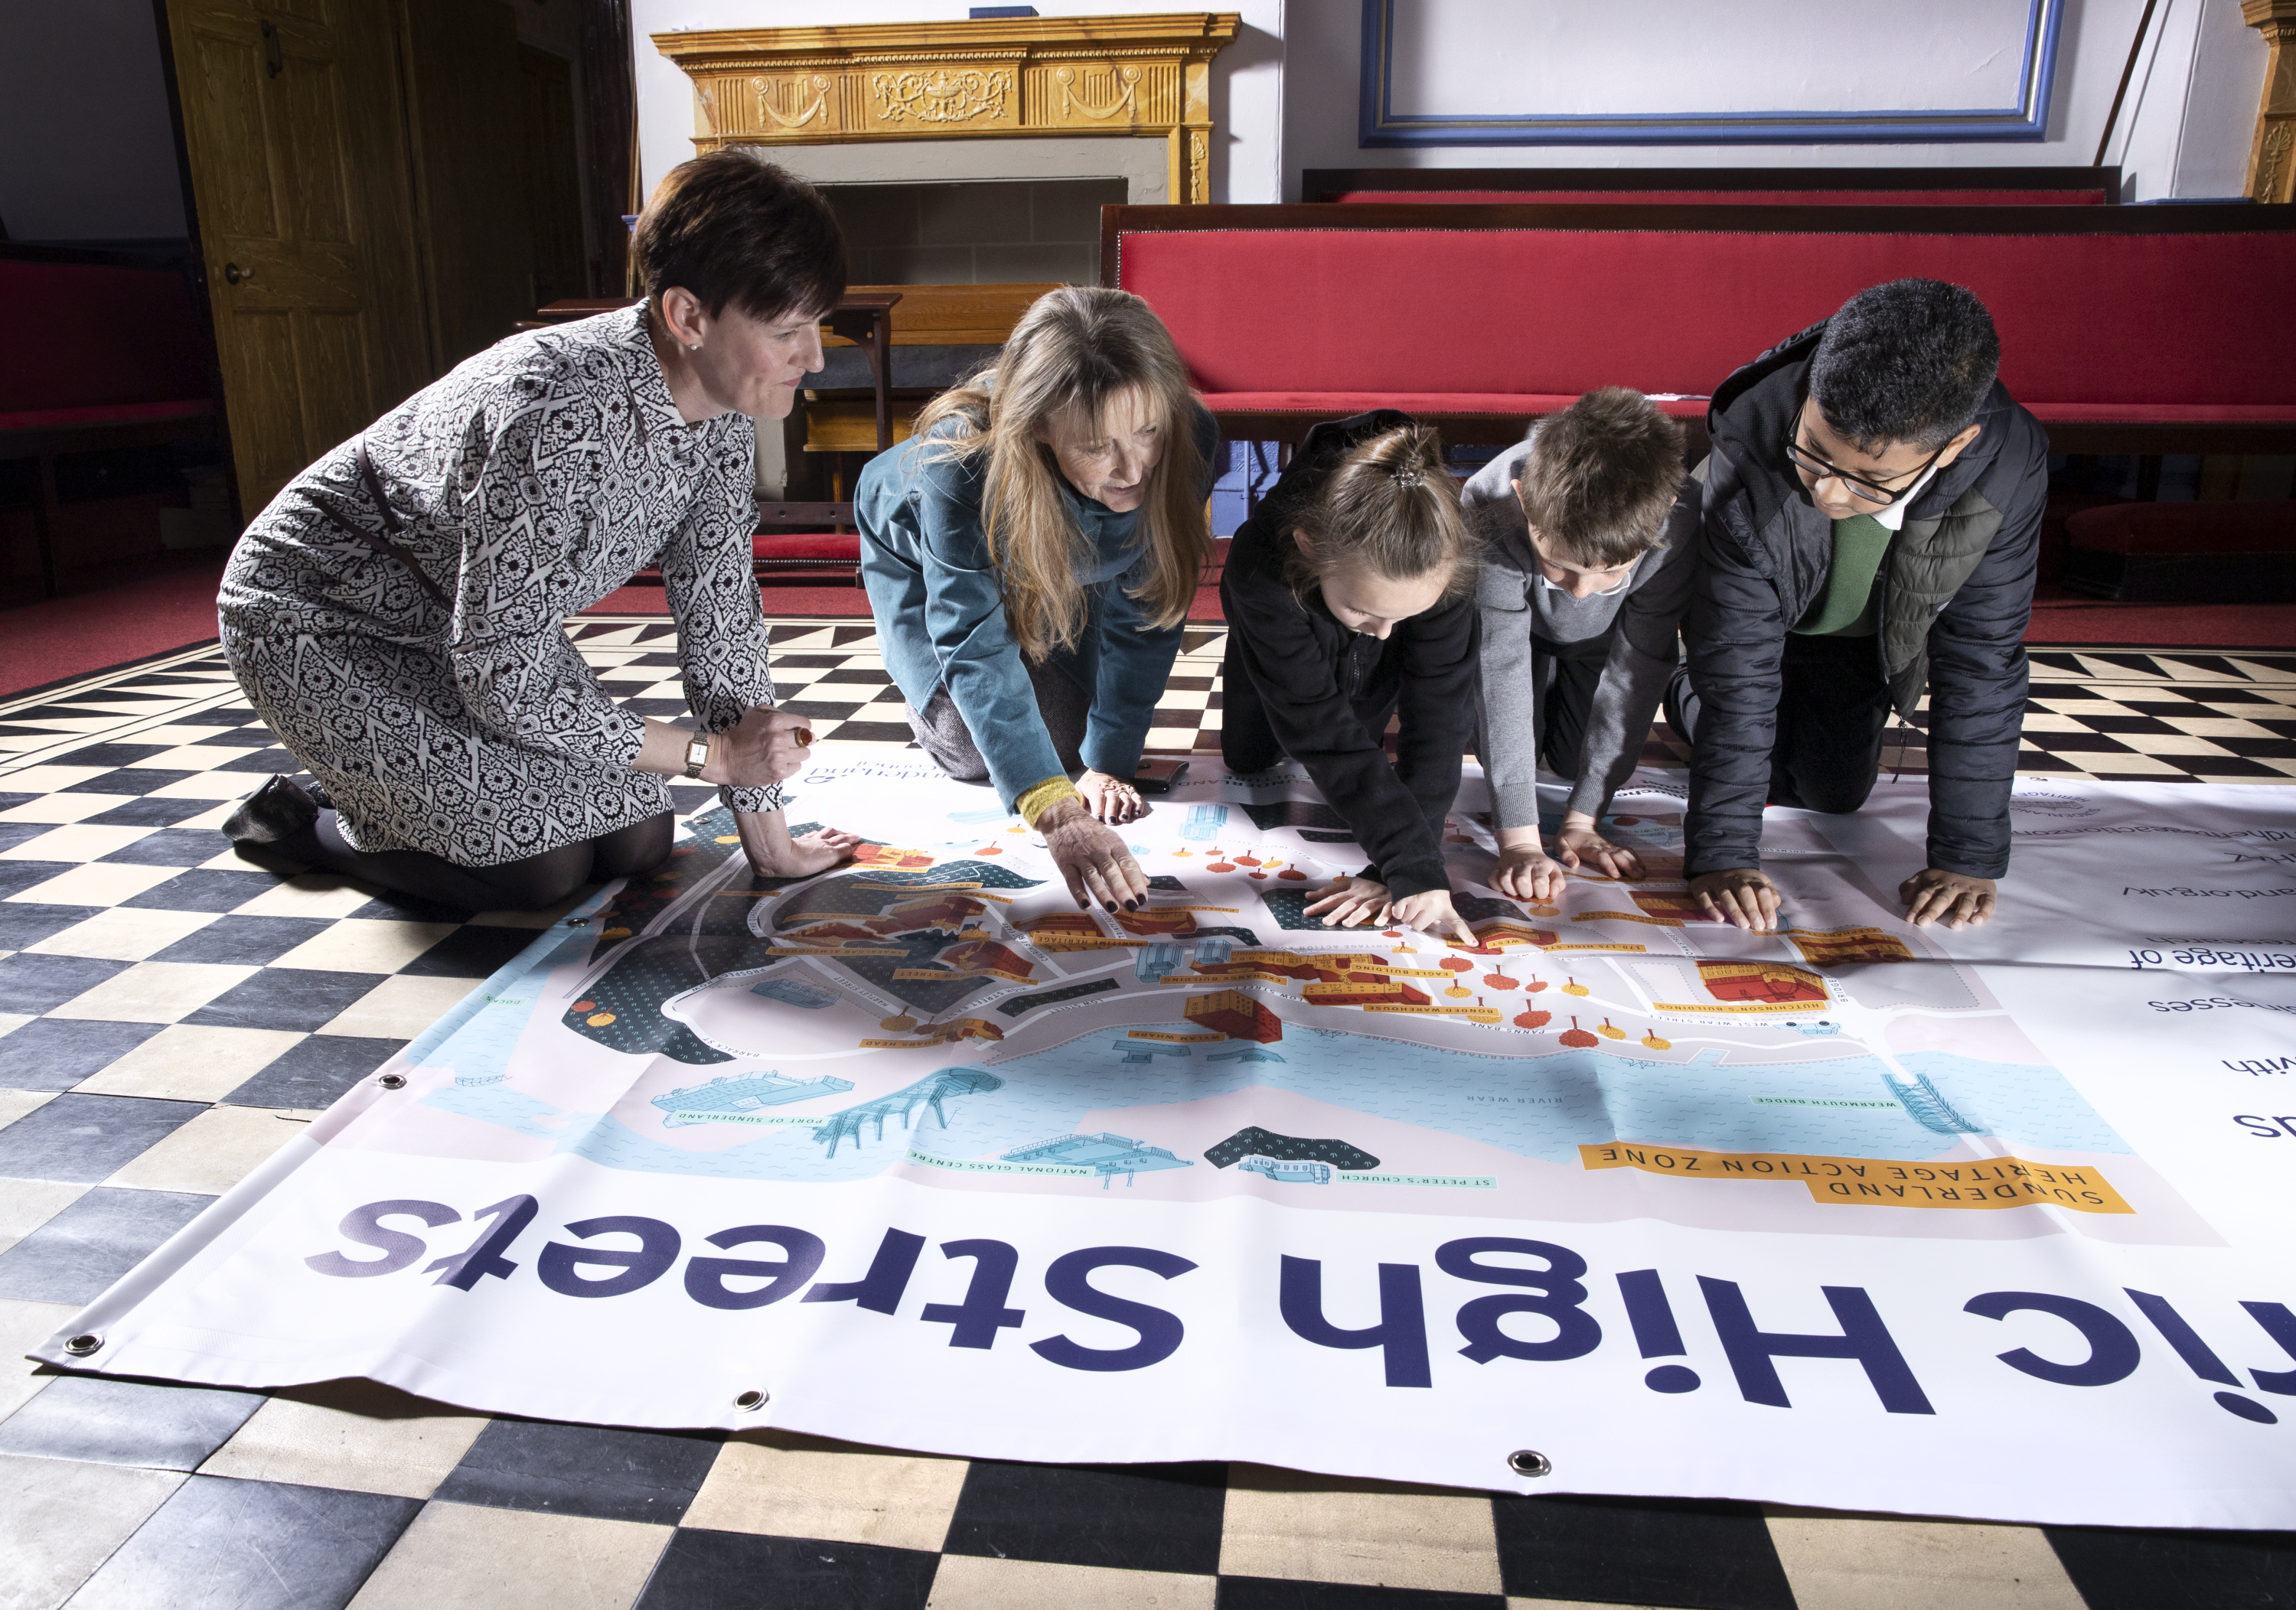 Three children and two adults looking at a banner map on an indoor floor.